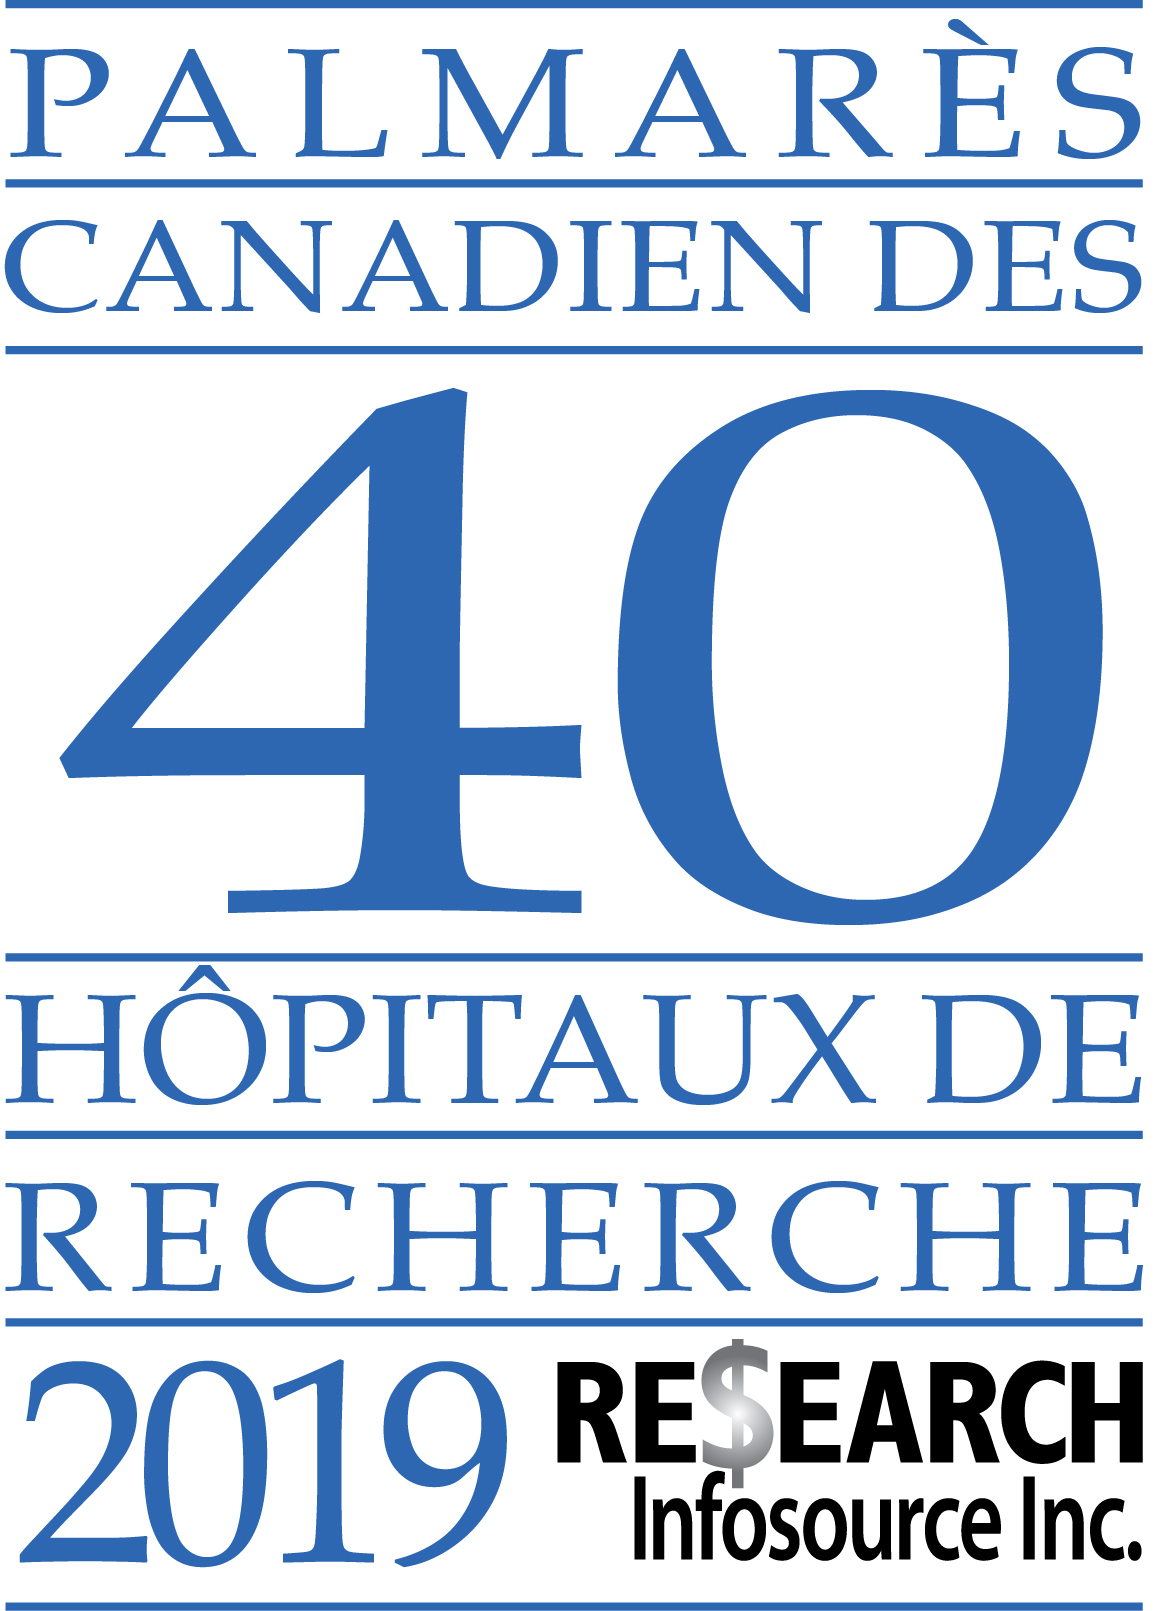 Canadian top 40 research hospital list 2018